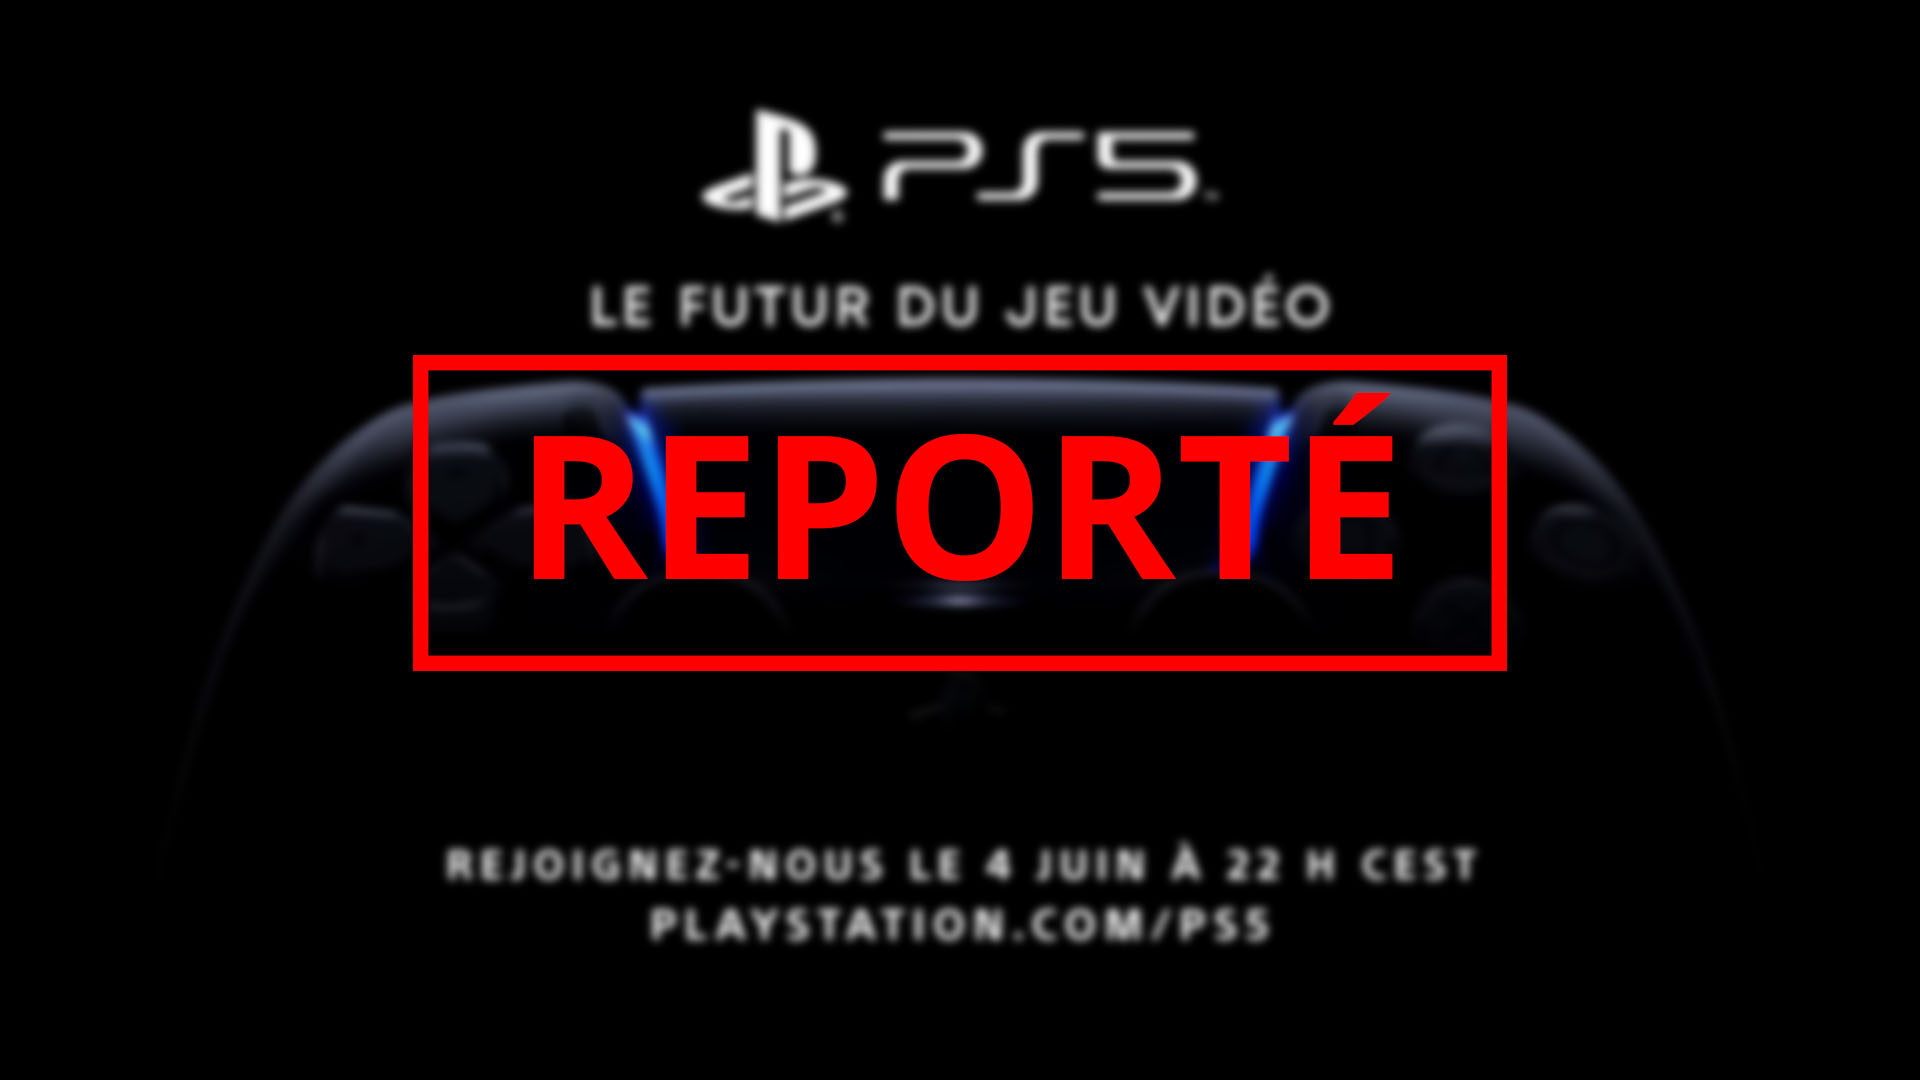 annonce event ps5